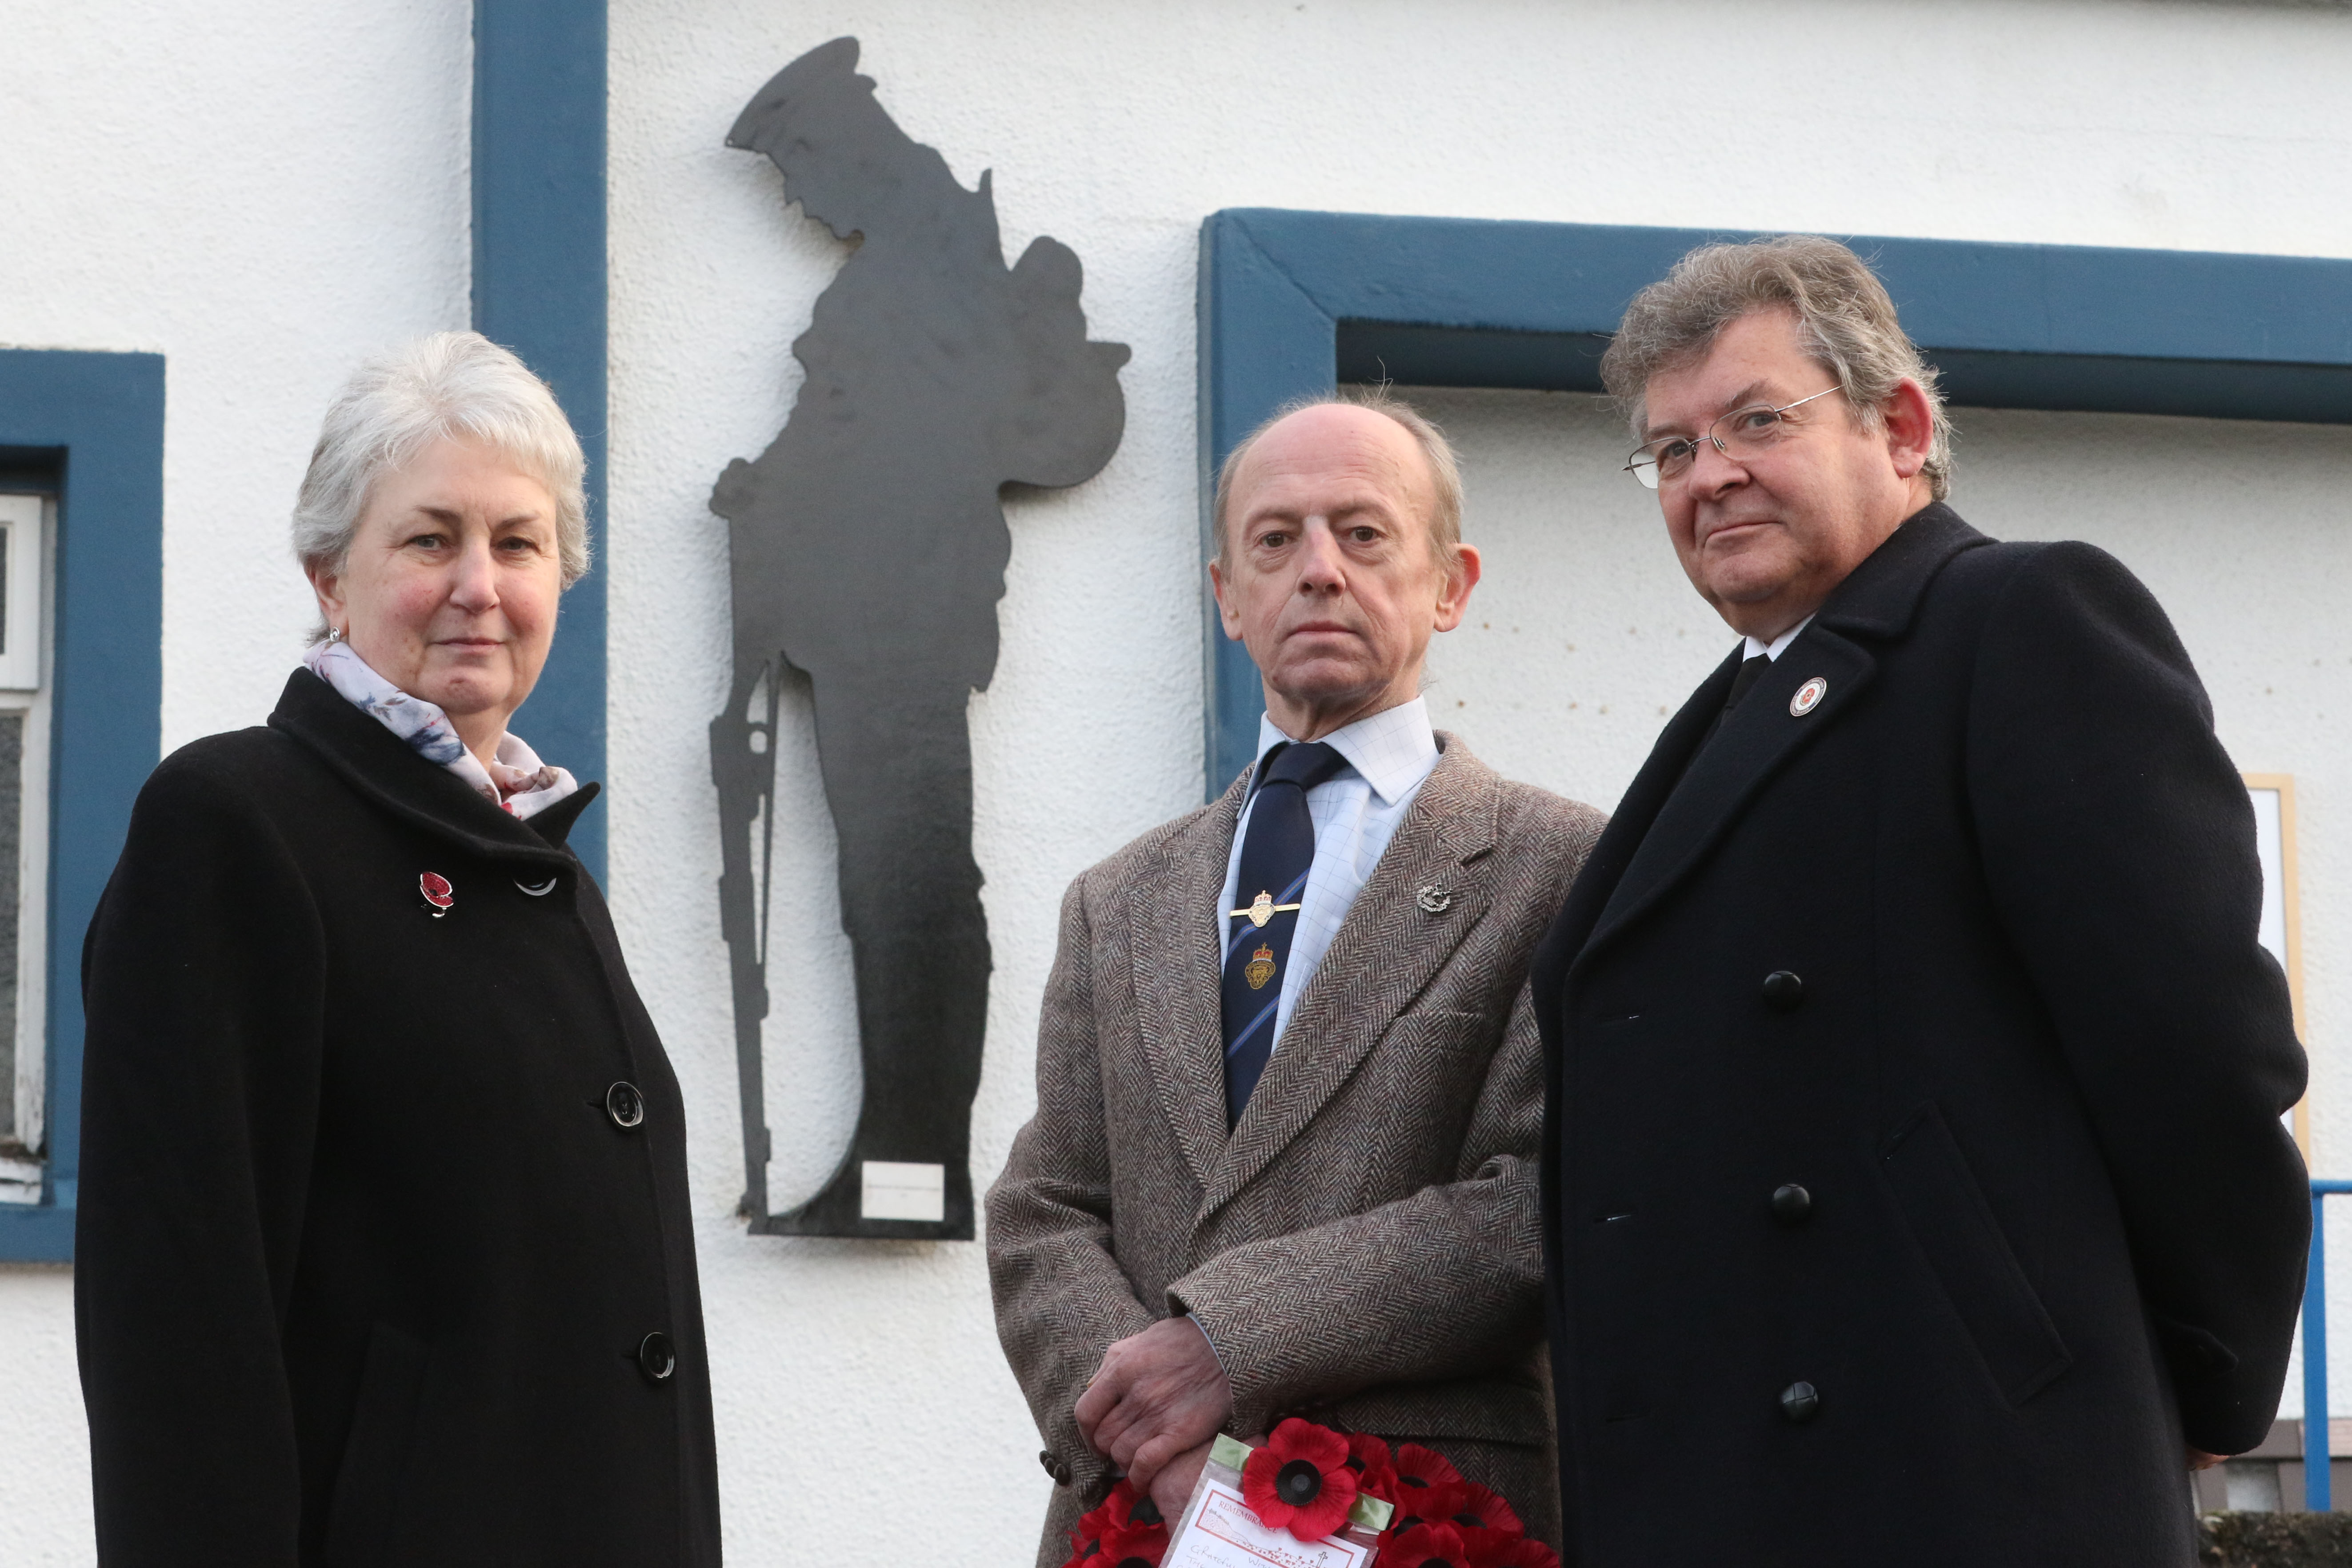 Linda Coe, chairwoman of Grantown and Vicinity Community Council, Roger Grant of the Grantown branch of the Royal British Legion and Ewan MacGregor, also of the community council, next to the Silent Soldier Silhouette.